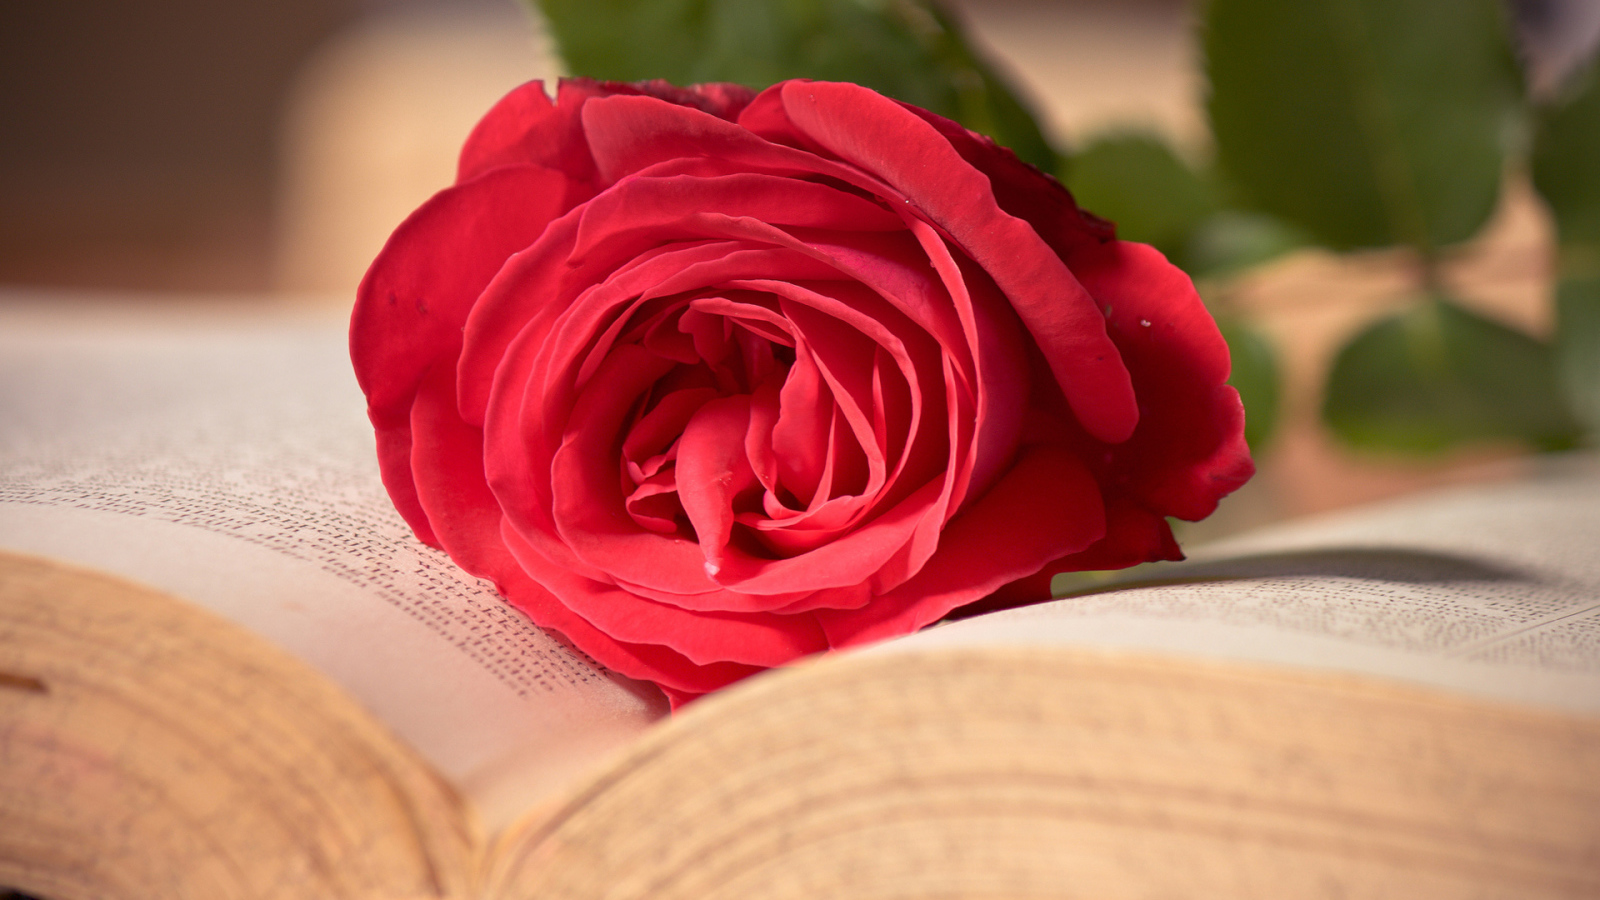 Red rose on the pages